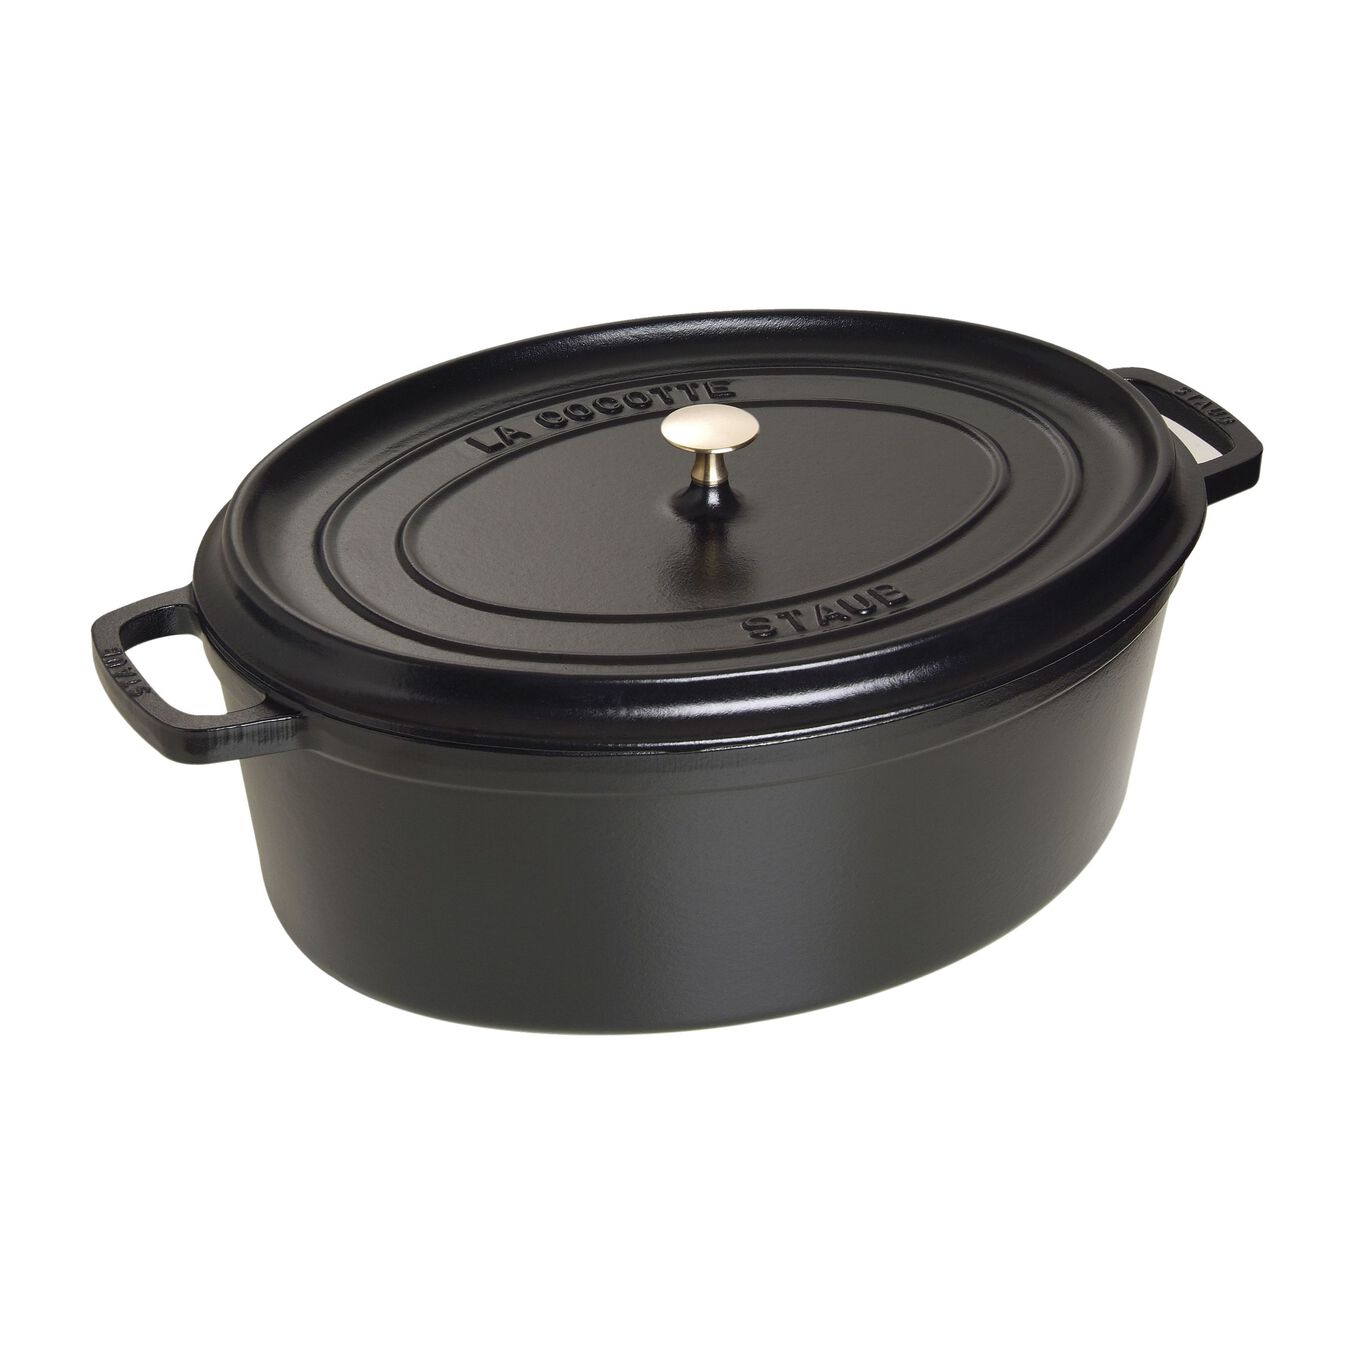 12 l cast iron oval Cocotte, black - Visual Imperfections,,large 1